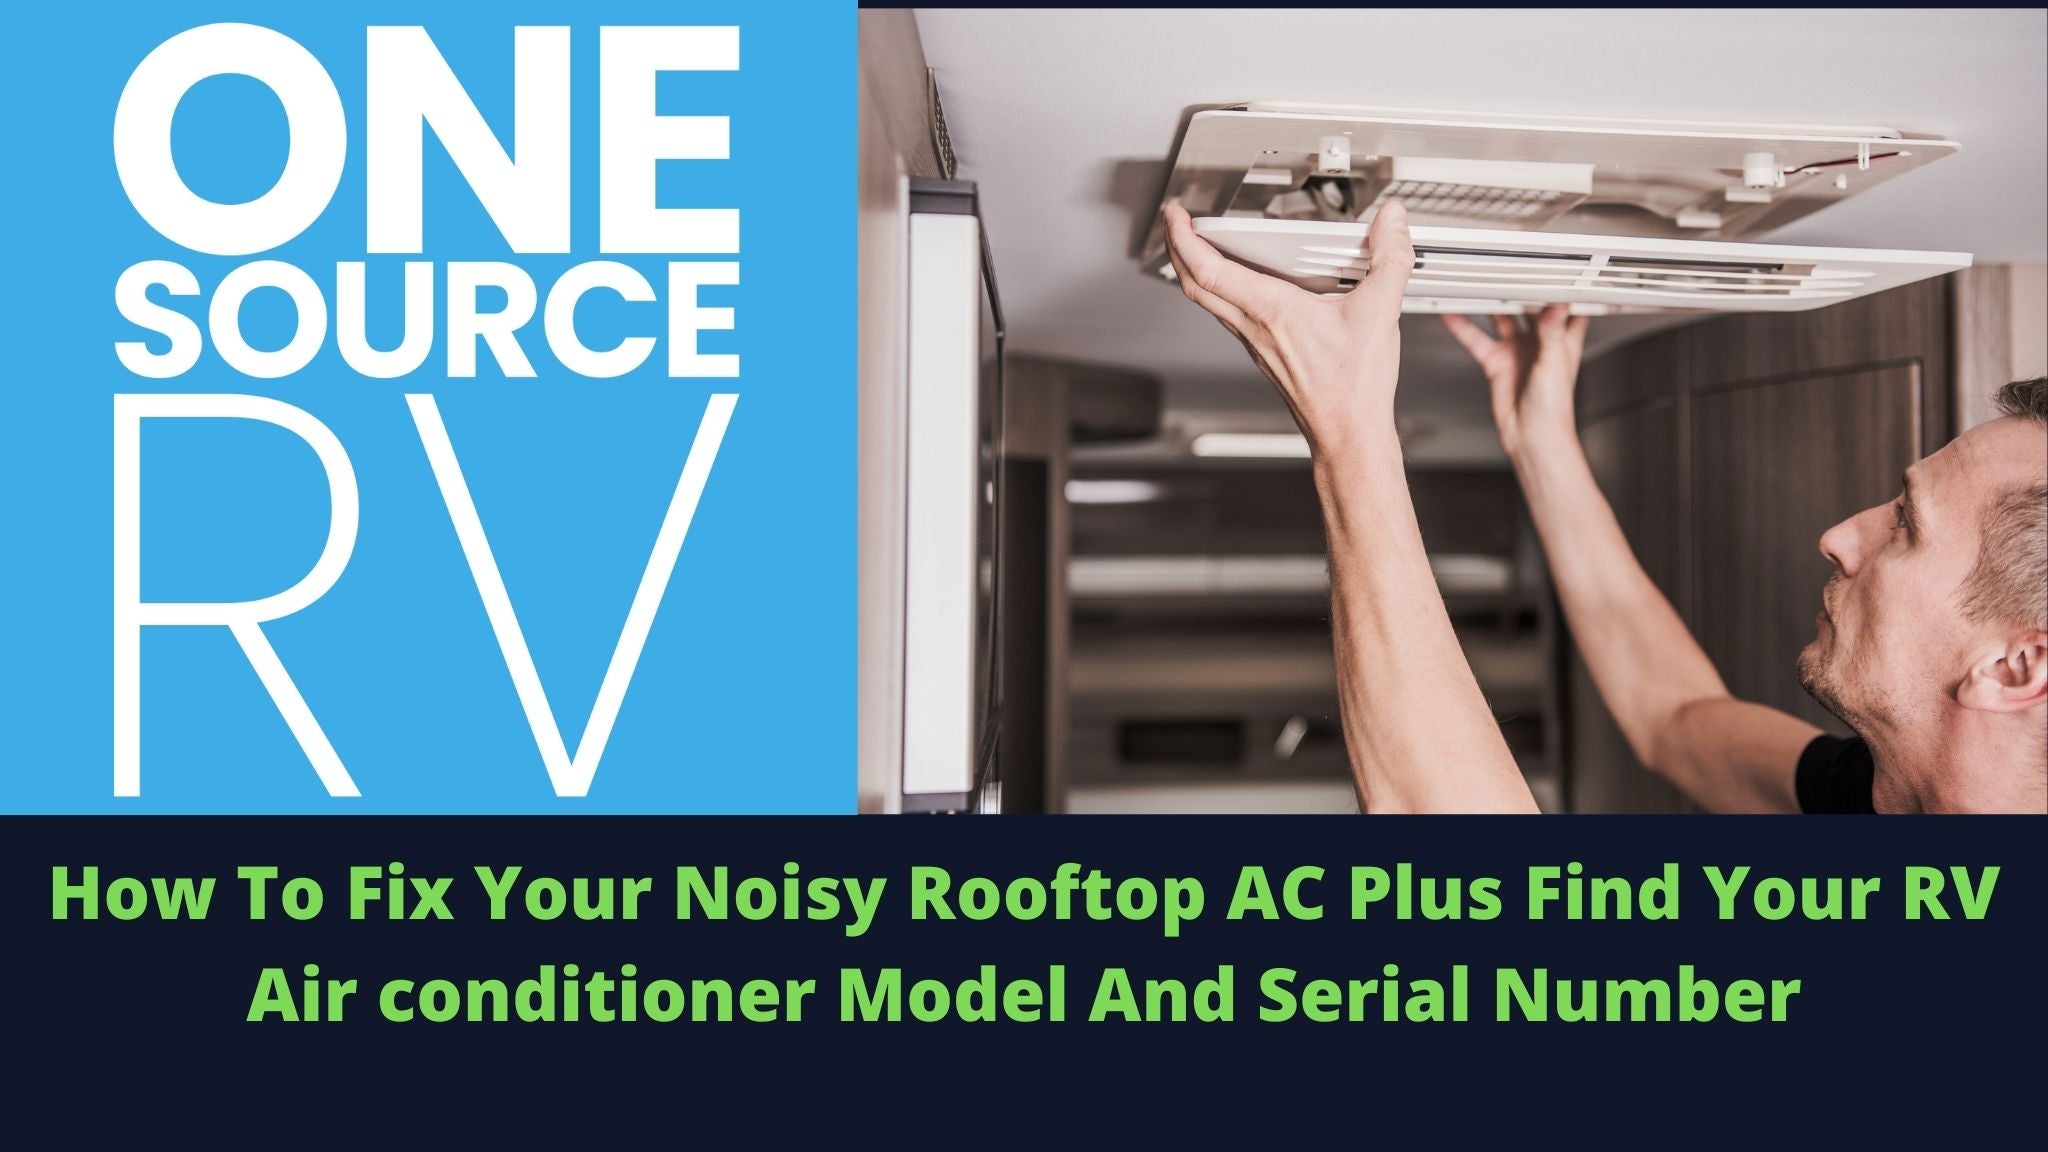 RV Tips- How to fix your noisy rooftop AC & finding your Model/ Serial Number for your Rooftop AC